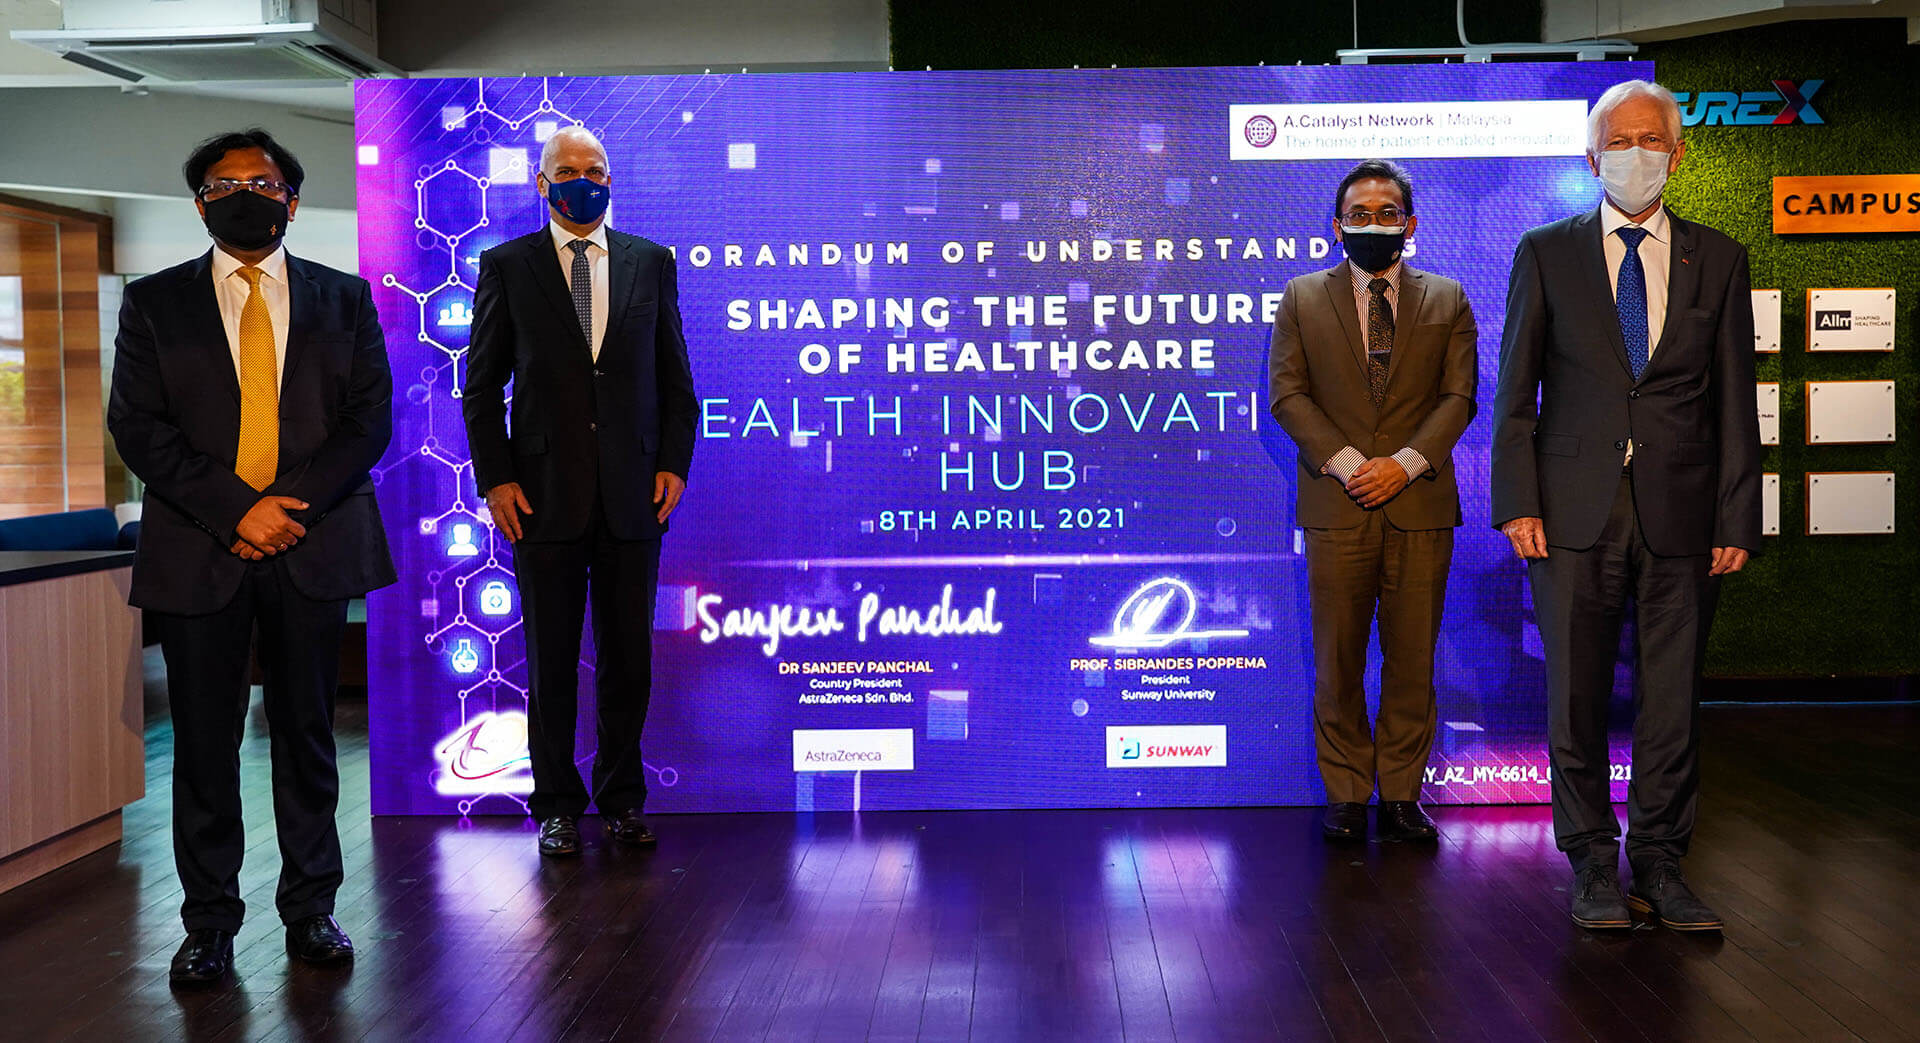 AstraZeneca and Sunway Launch First Health Innovation Hub in Malaysia